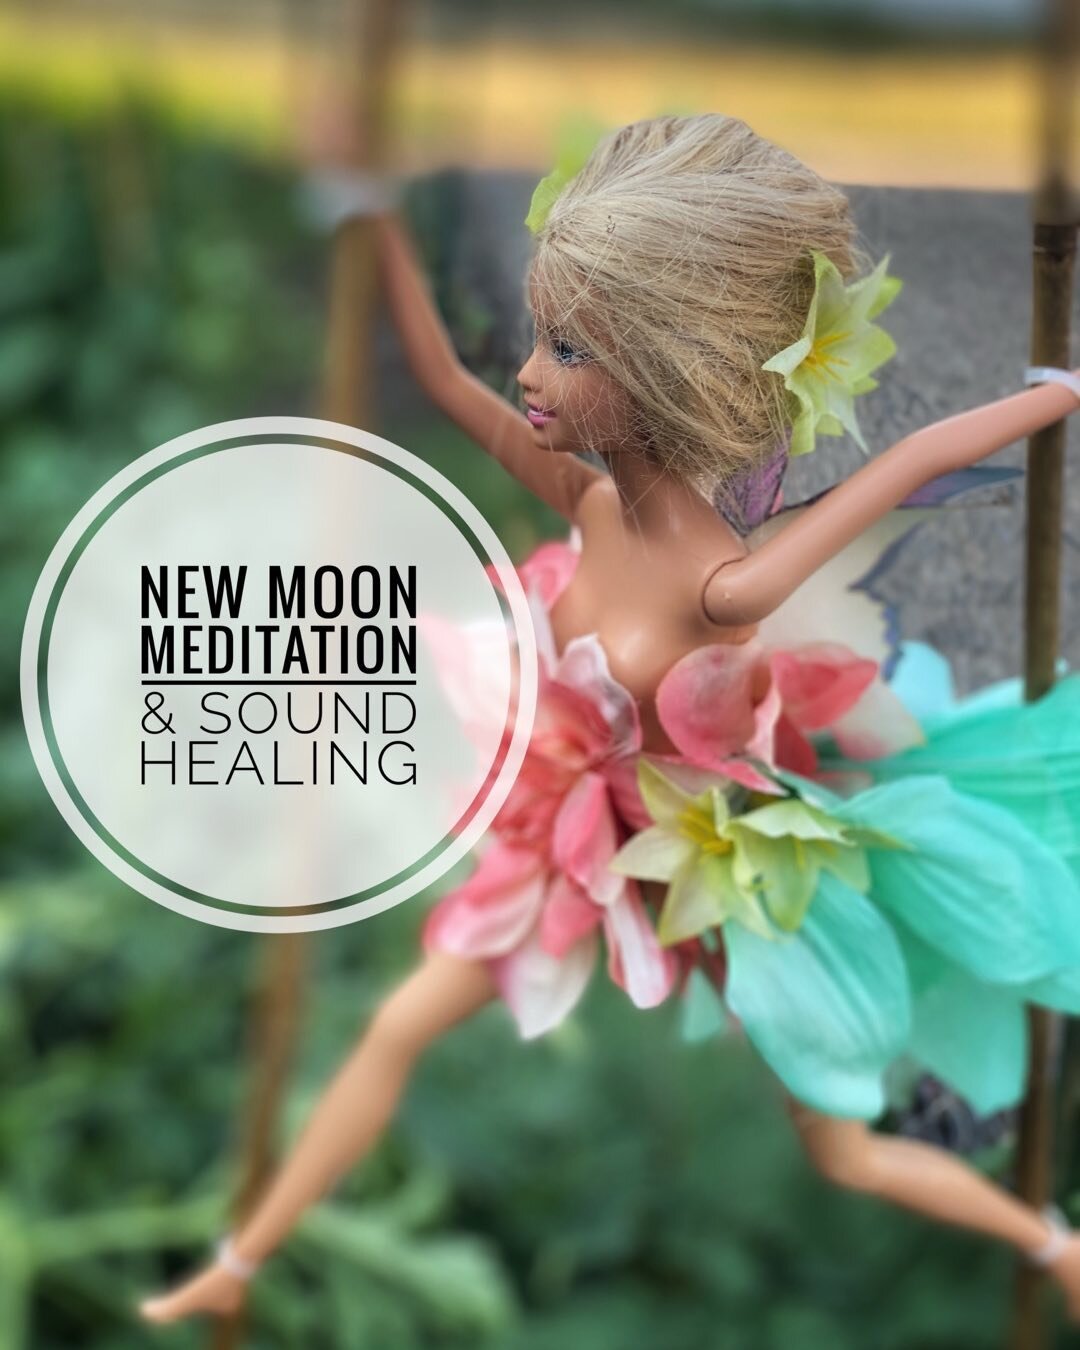 Join me on Thursday, July 28th at 7:30pm central for a New Moon Zoom event!
Astrology- guided meditation - sound healing - $35 pp

Register in BIO! 

#energyhealingcoach #energyshifts #spiritualteachers #distanthealing #spiritualwarriors #spiritually